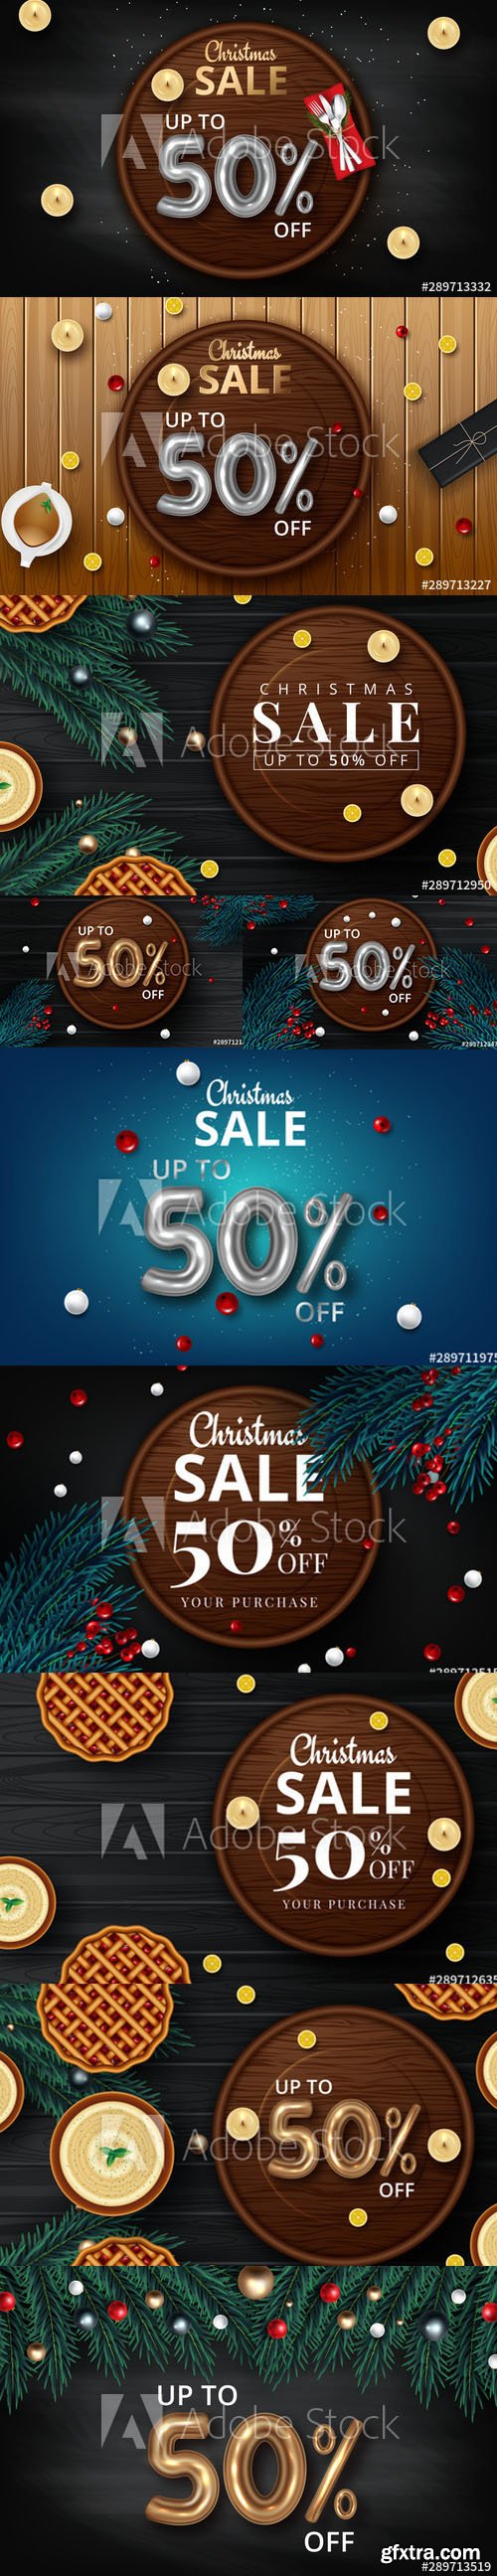 Vector Set - Christmas Sale Promotional Banner for Winter Holiday 2